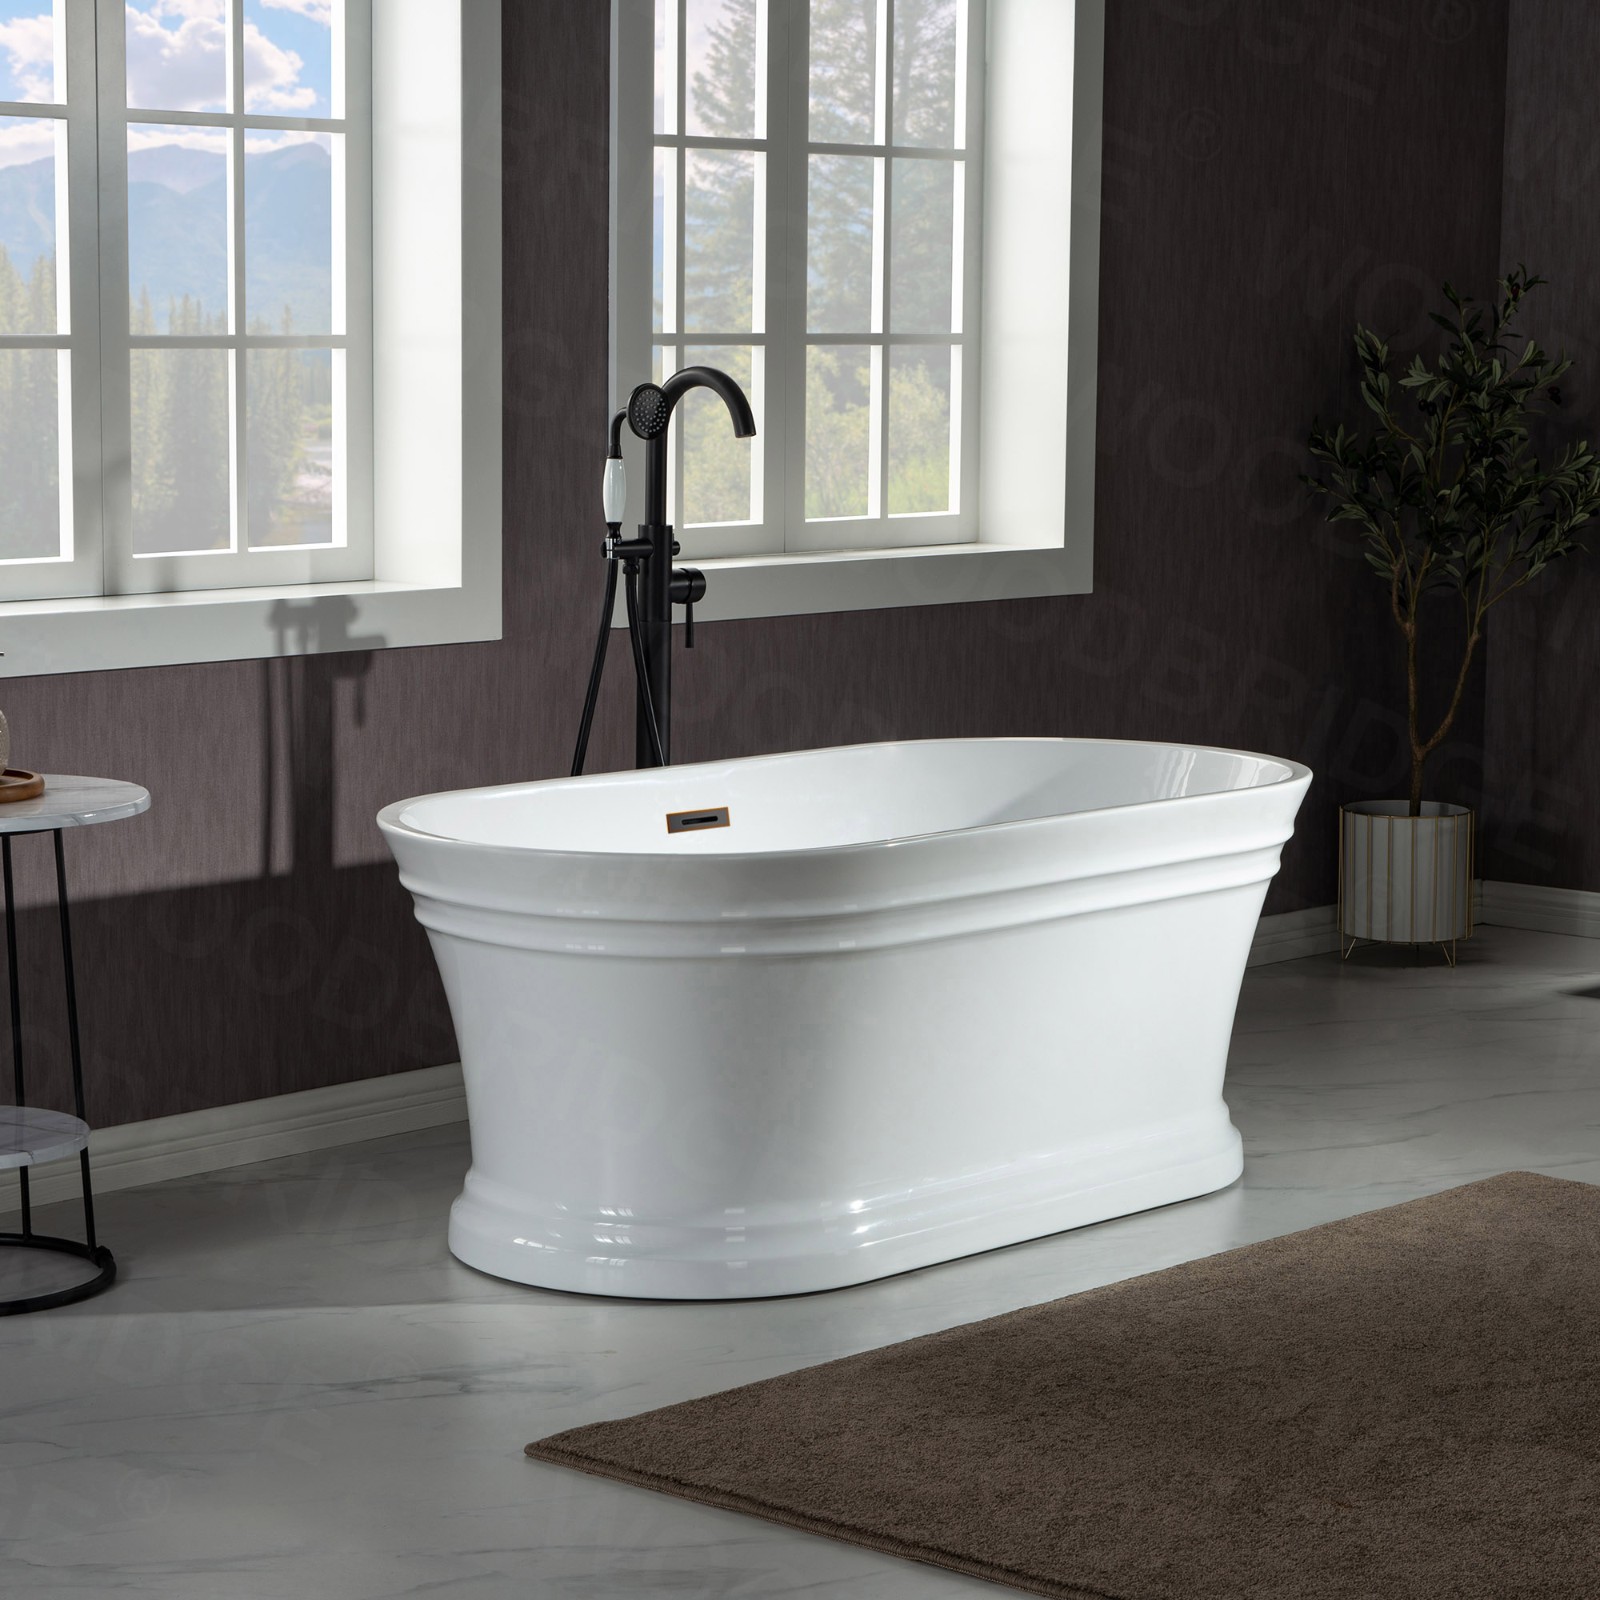  WOODBRIDGE 67 in. Freestanding Double Ended Acrylic Soaking Bathtub with Center Drain Assembly and Overflow, BTA1537/B1537, Glossy White_7679